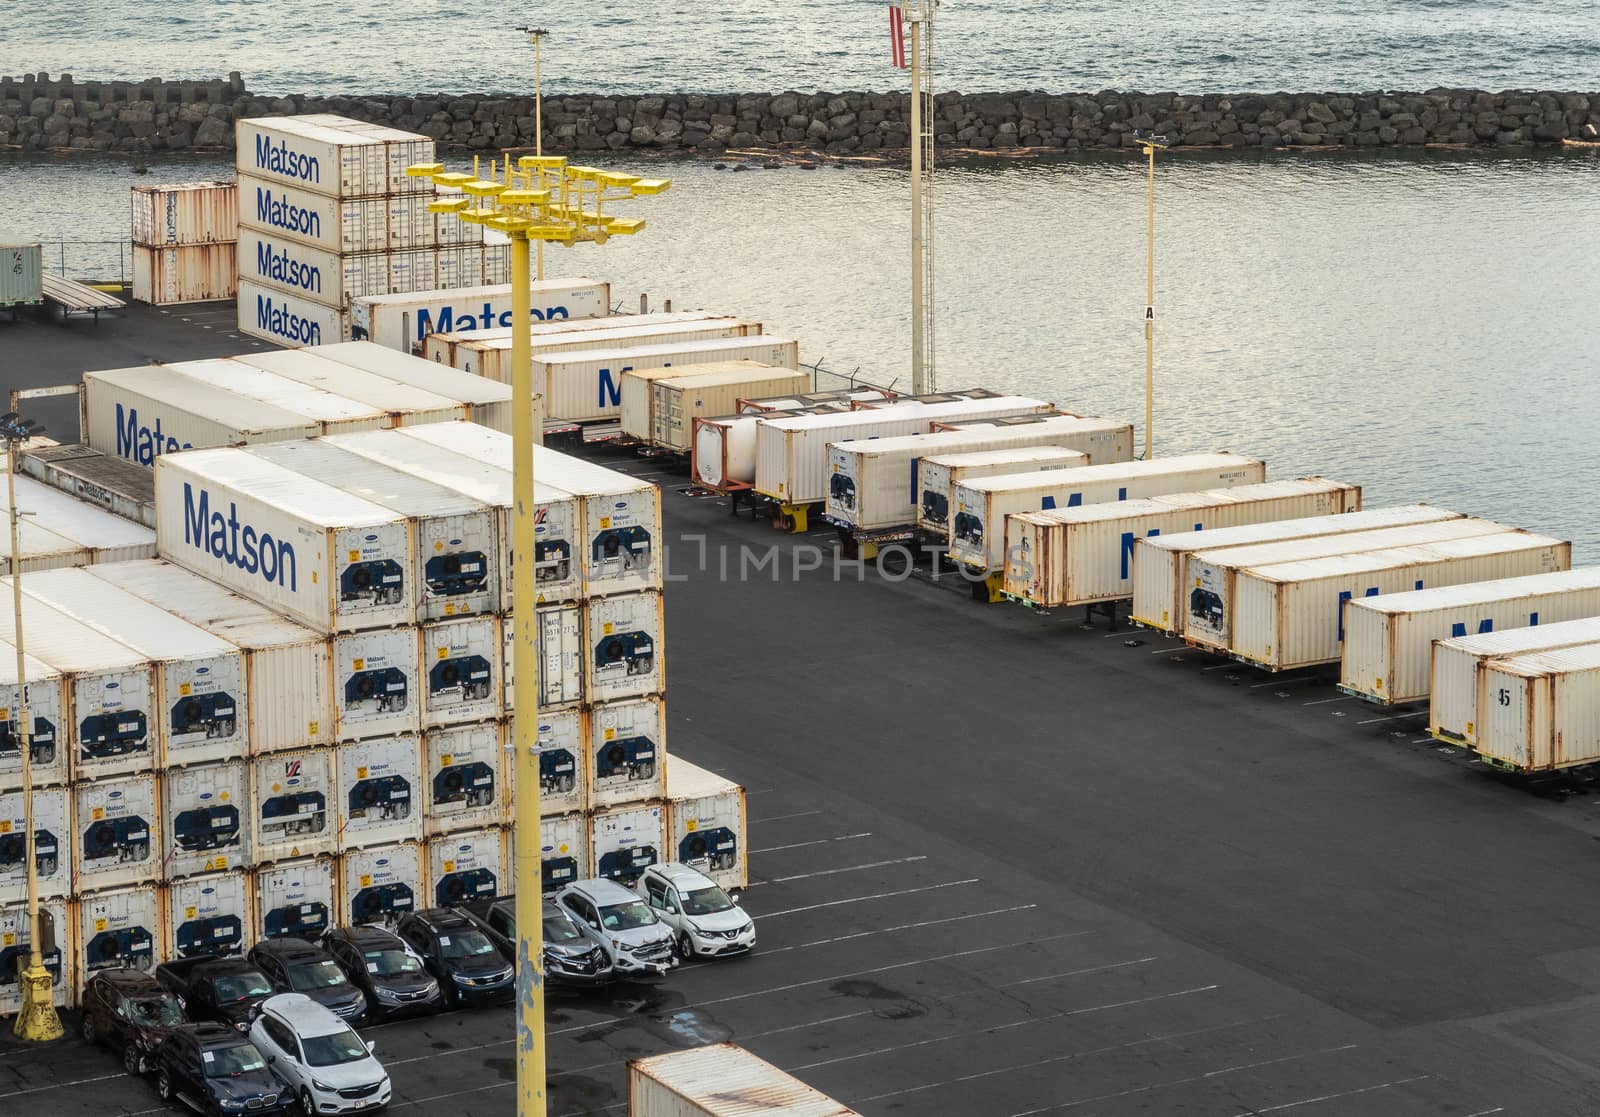 Hilo, Hawaii, USA. - January 14, 2020: Ocean port. Stacks of white and blue Matson shipping containers in quay. Breakwater separates ocean from harbor.